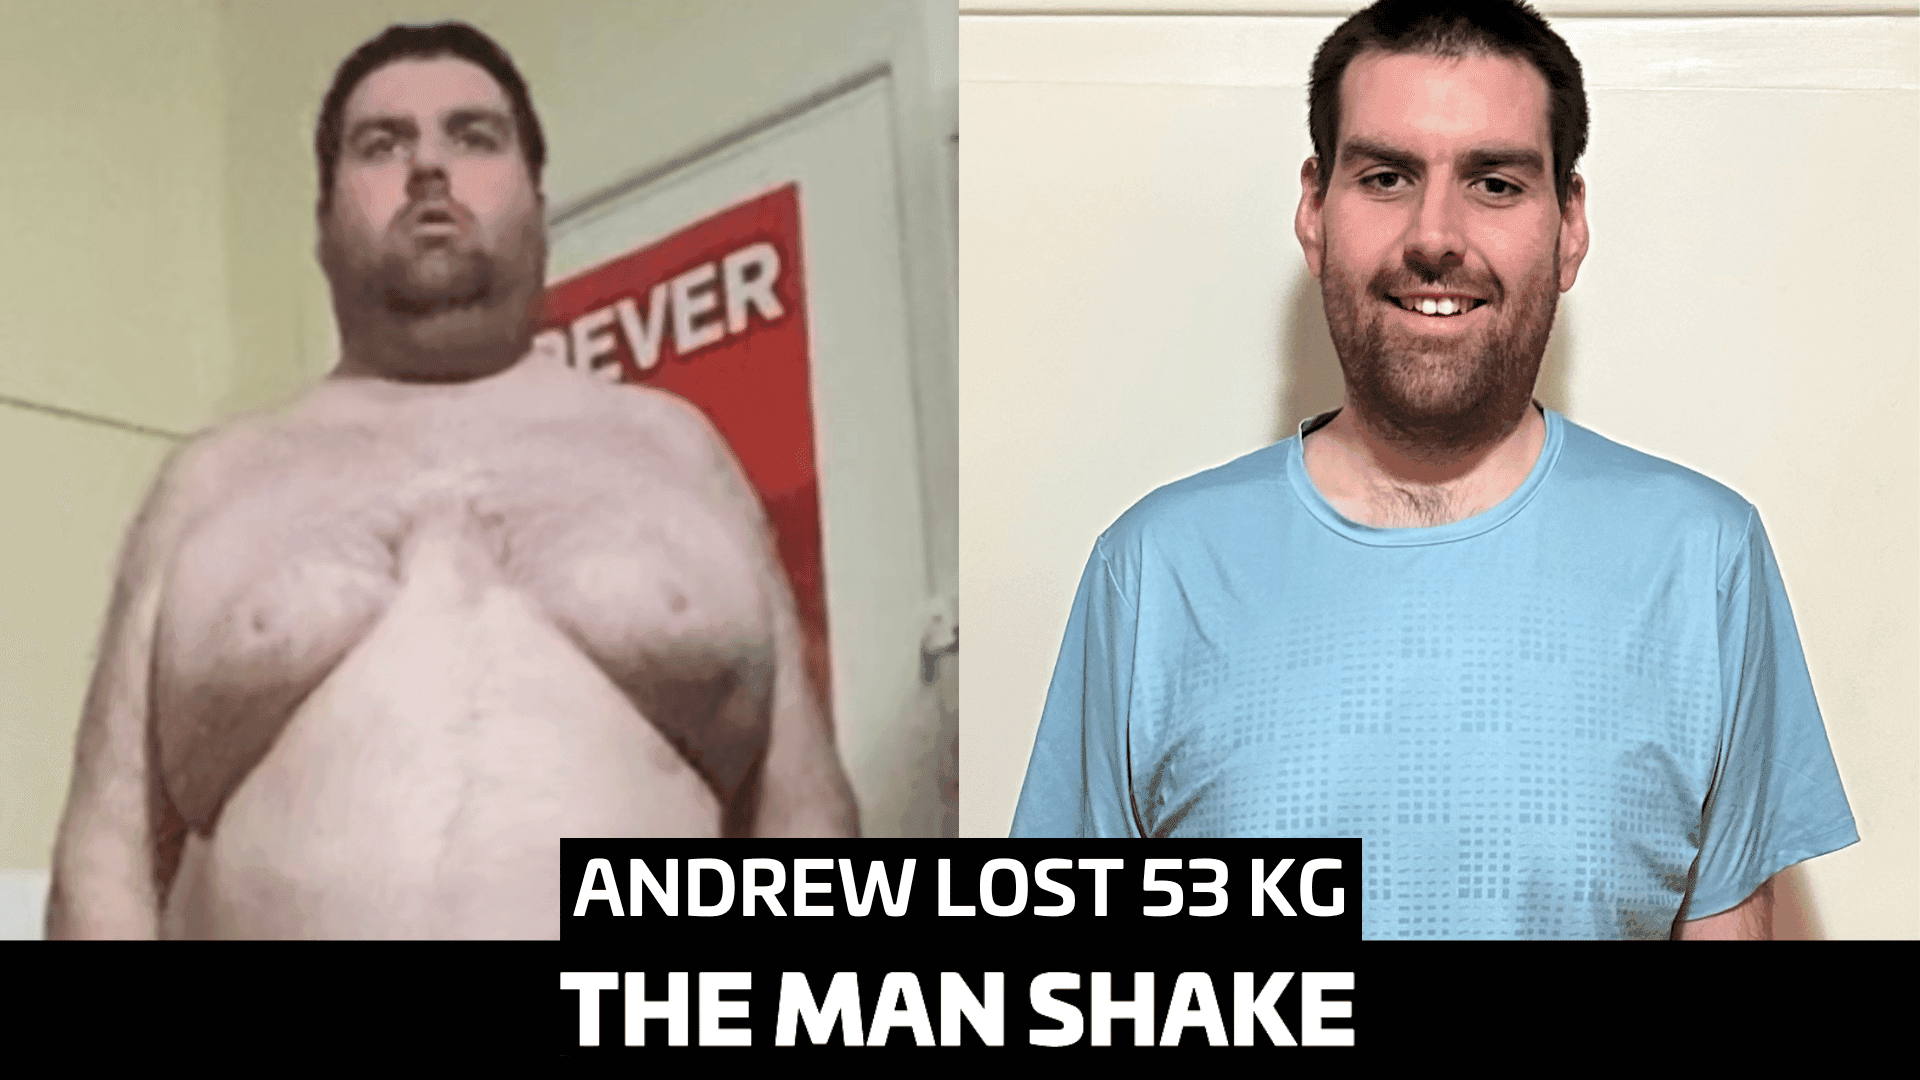 Andrew wanted to be his happier self so lost 53kgs!